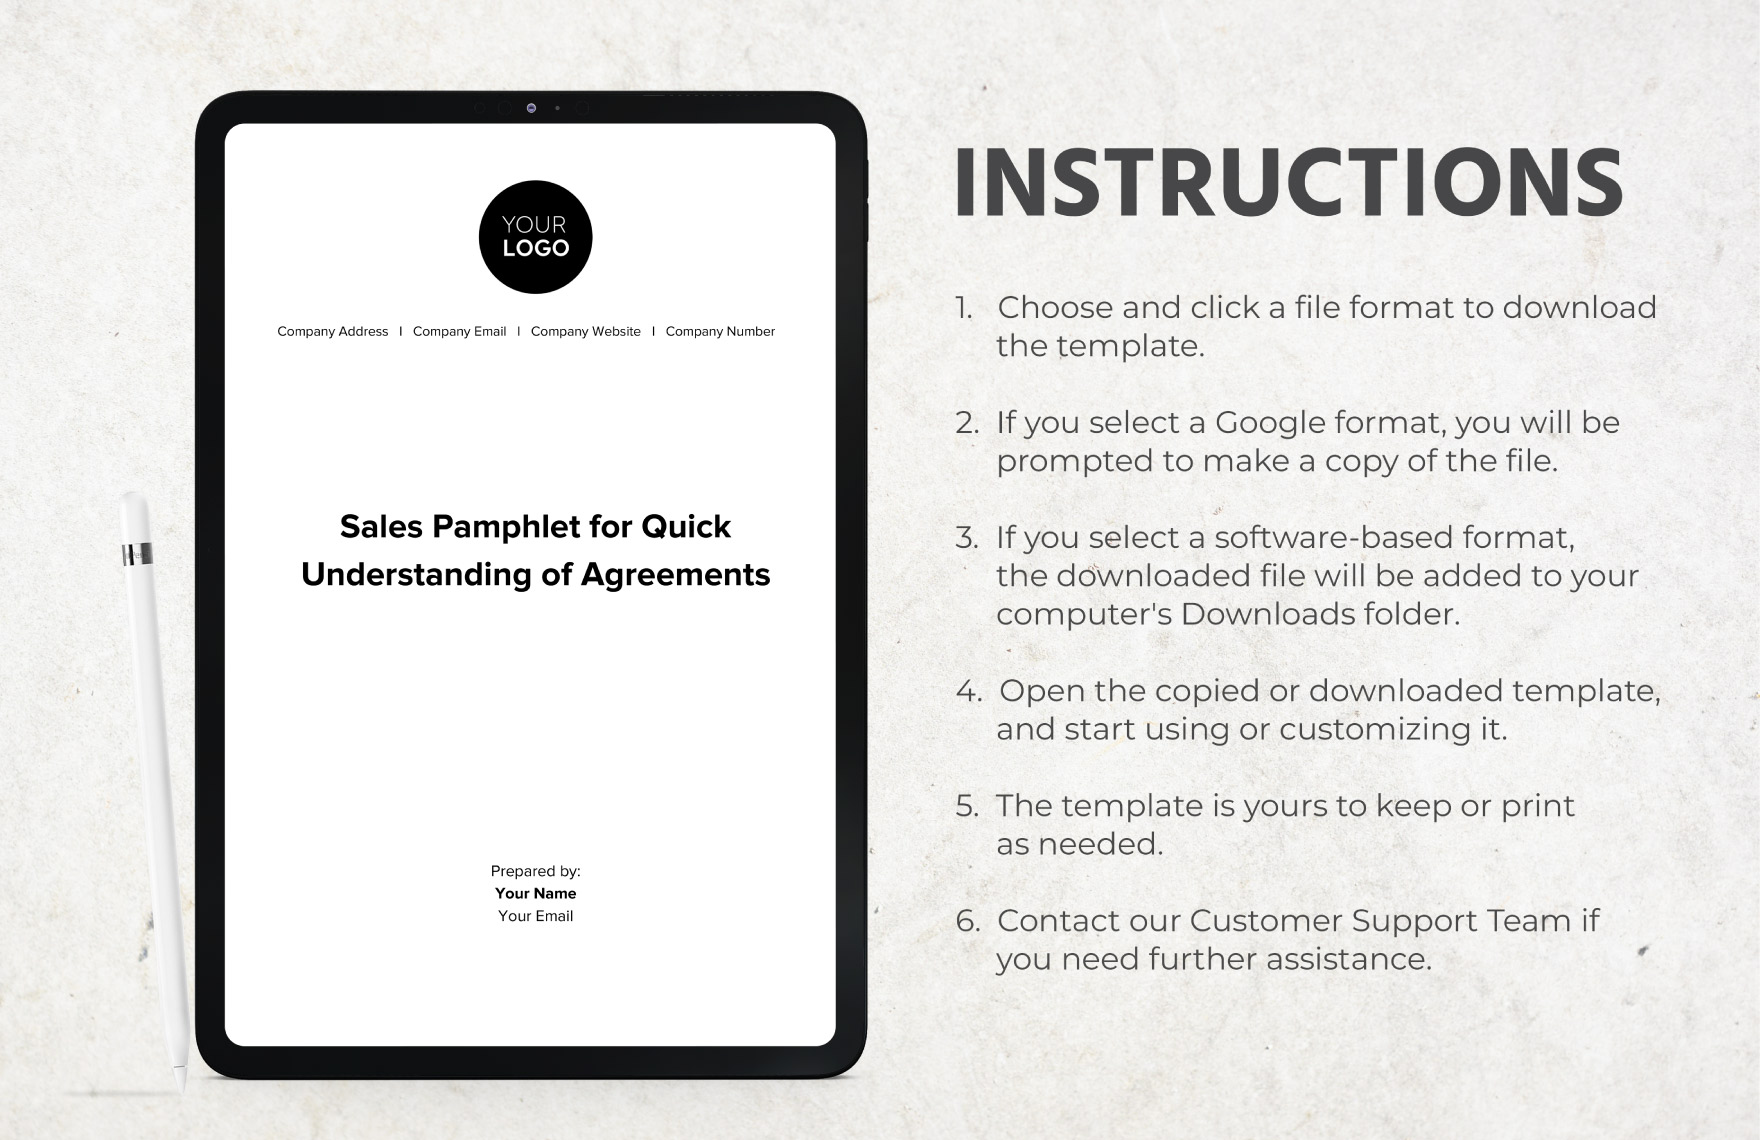 Sales Pamphlet for Quick Understanding of Agreements Template